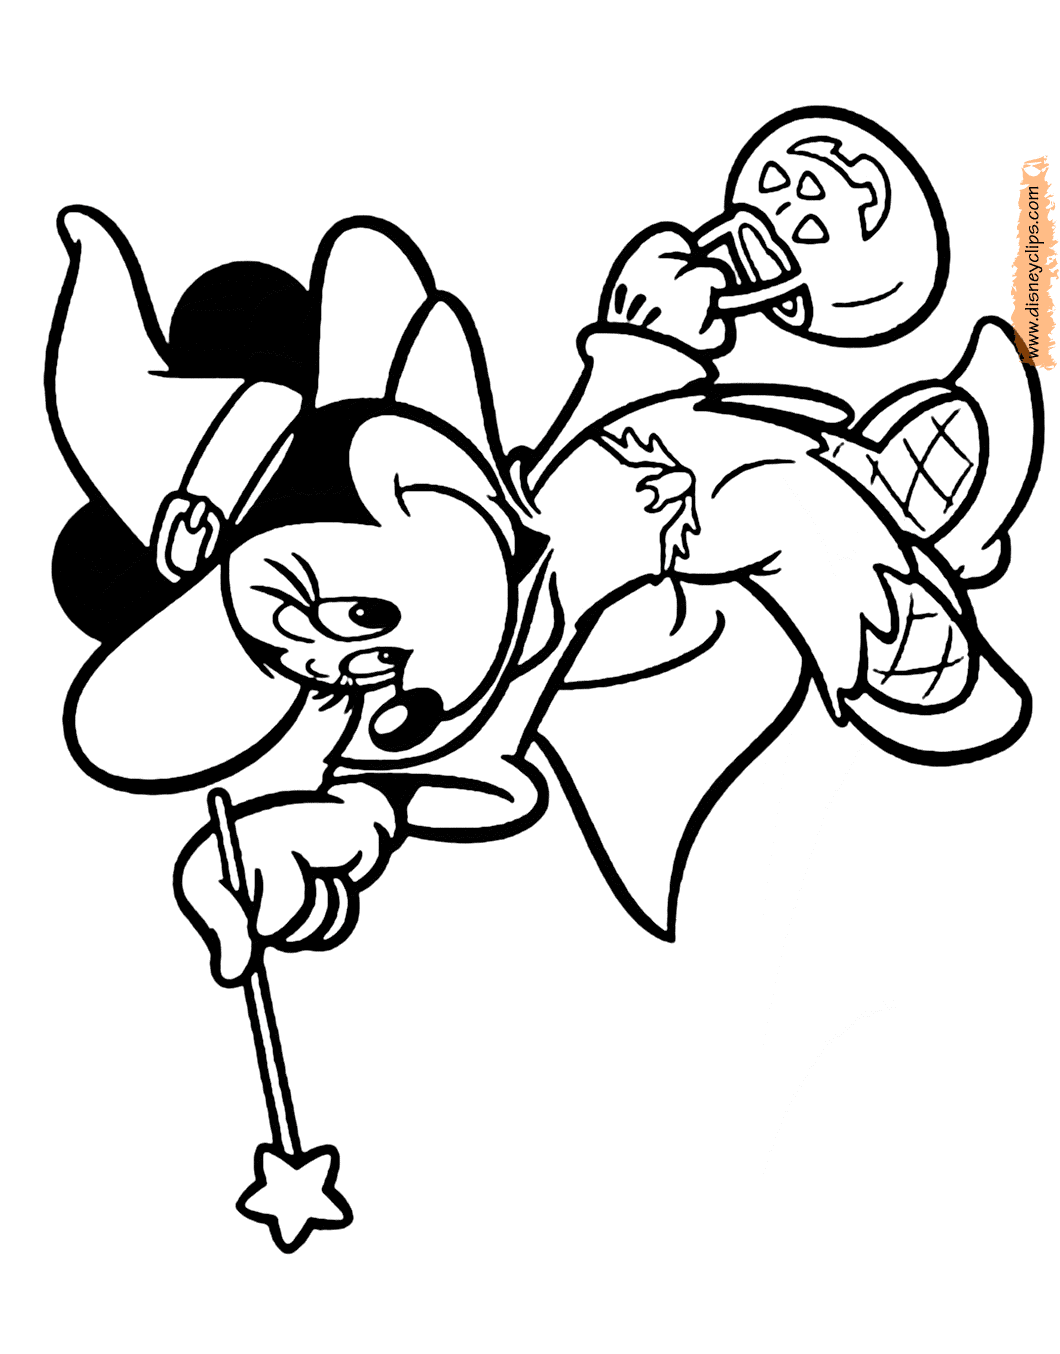 kaboose coloring pages halloween mickey - photo #15